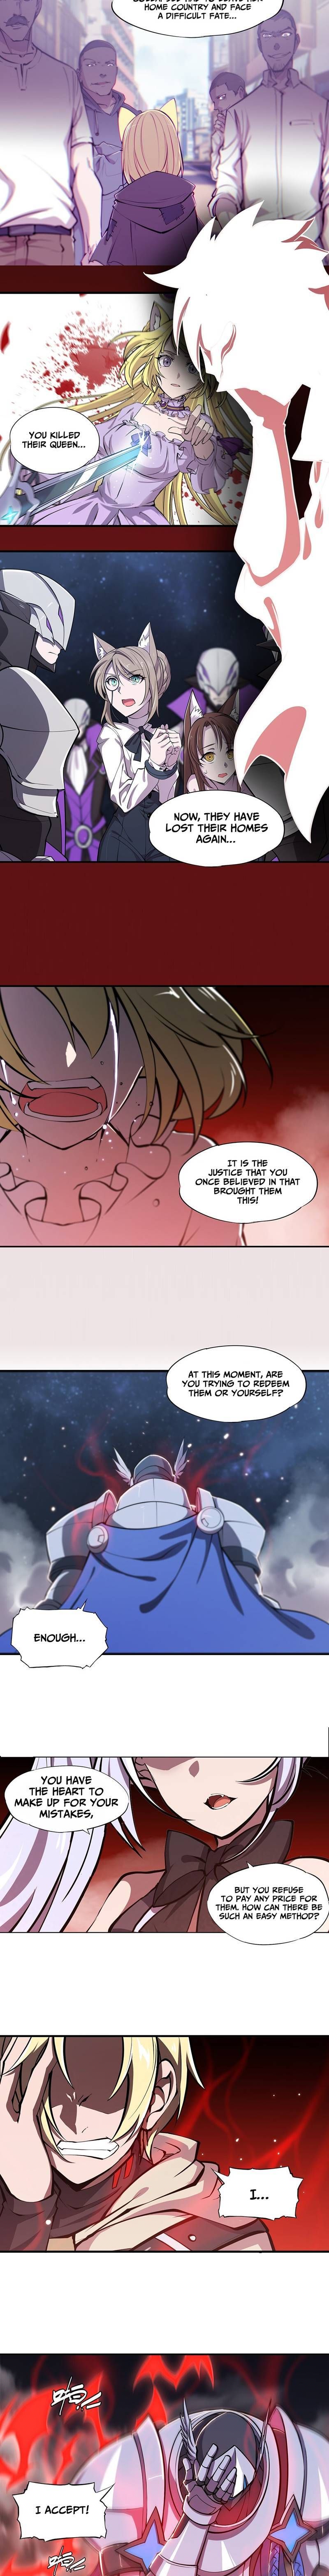 The Blood Princess and the Knight Chapter 130 page 5